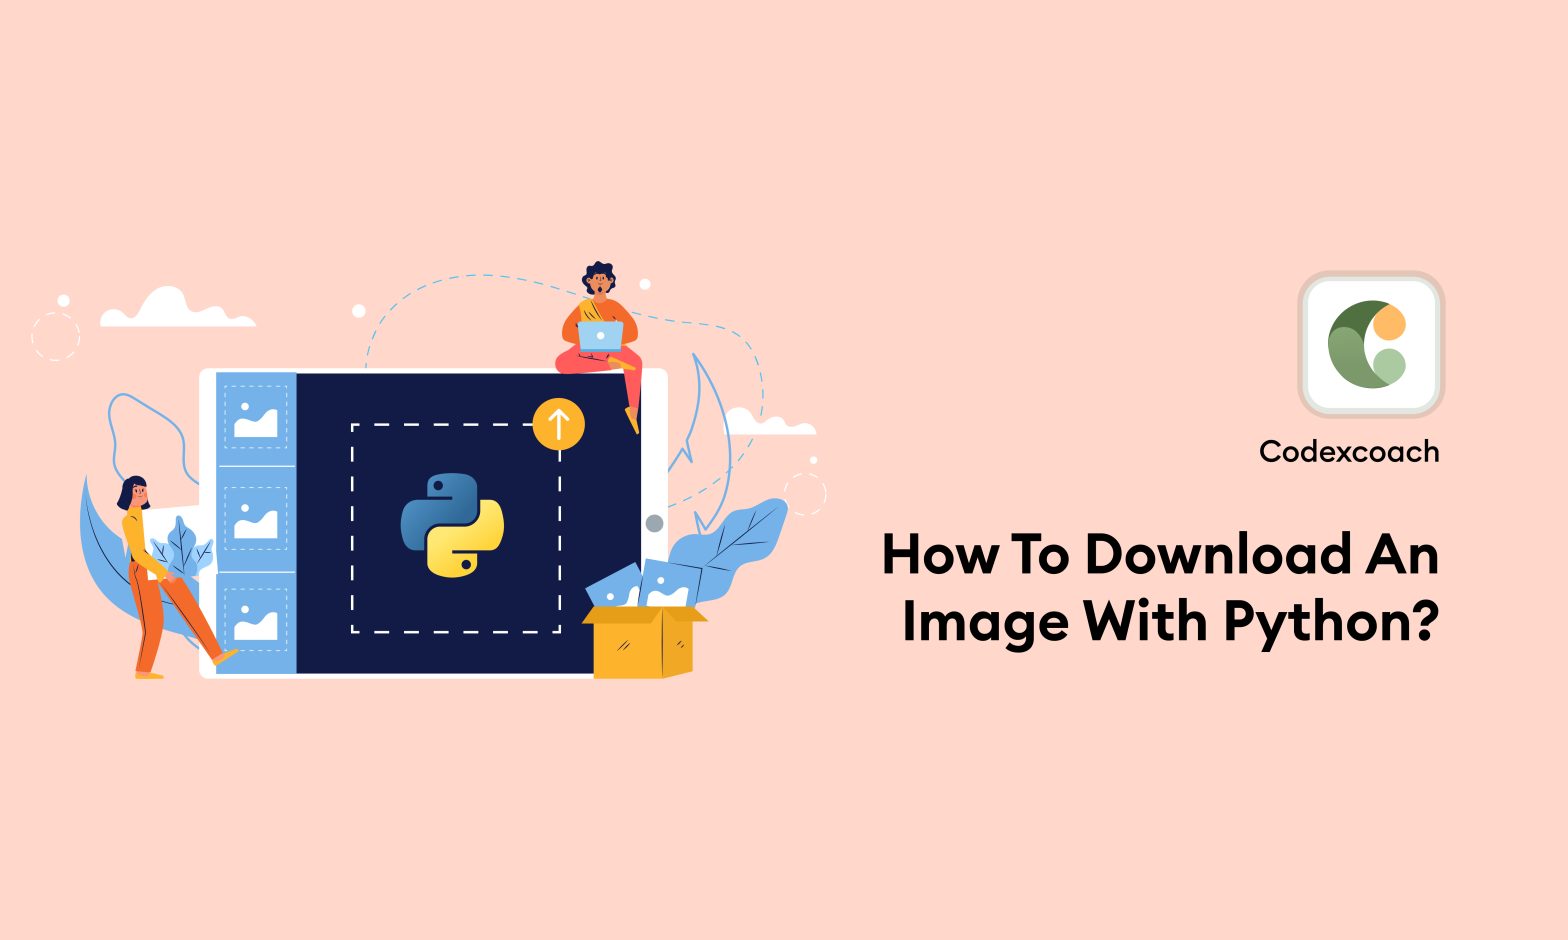 How To Download An Image With Python?